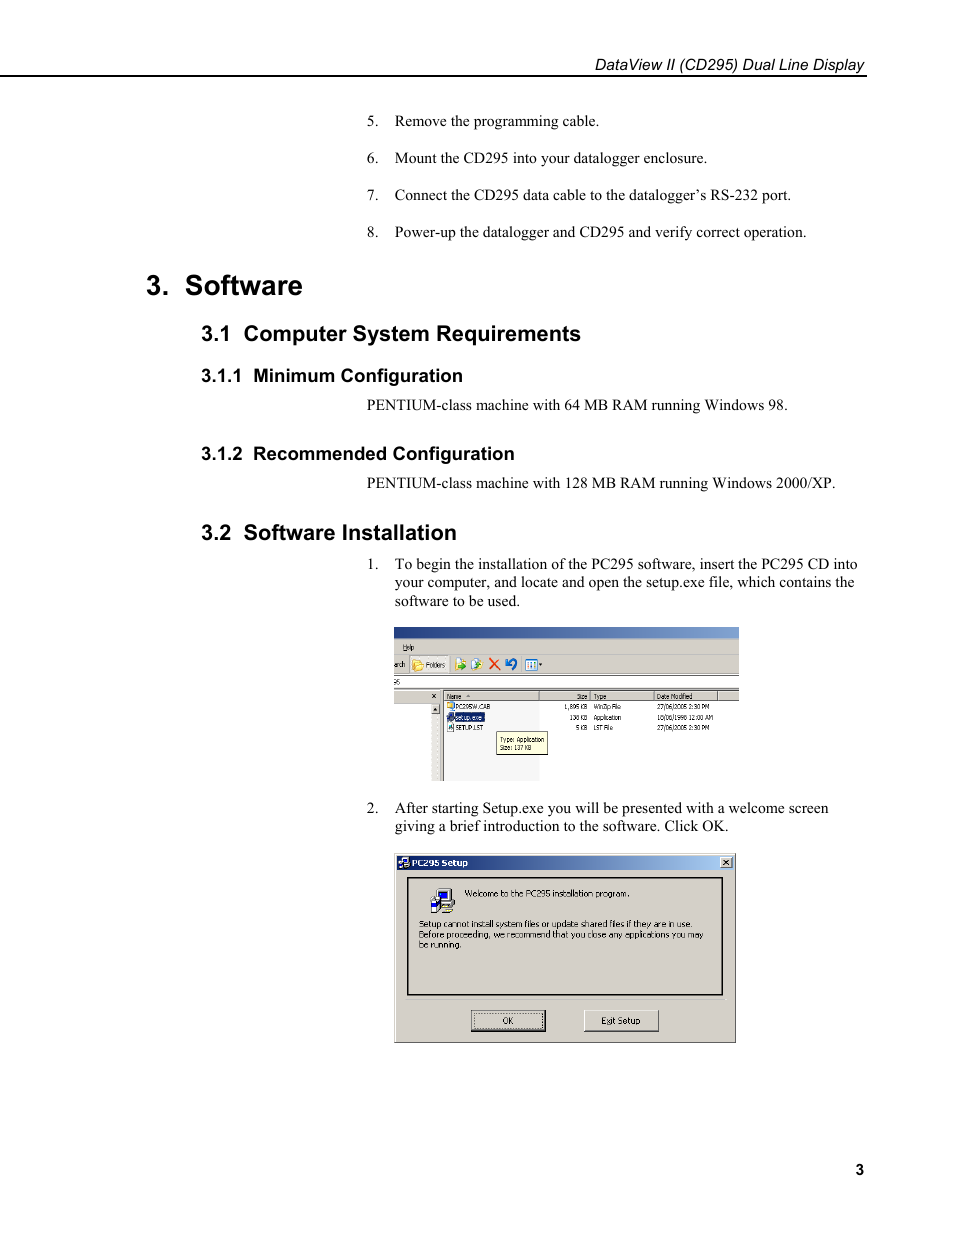 Software, 1 computer system requirements, 1 minimum configuration | 2 recommended configuration, 2 software installation | Campbell Scientific CD295 DataView II Dual Line Display User Manual | Page 7 / 36